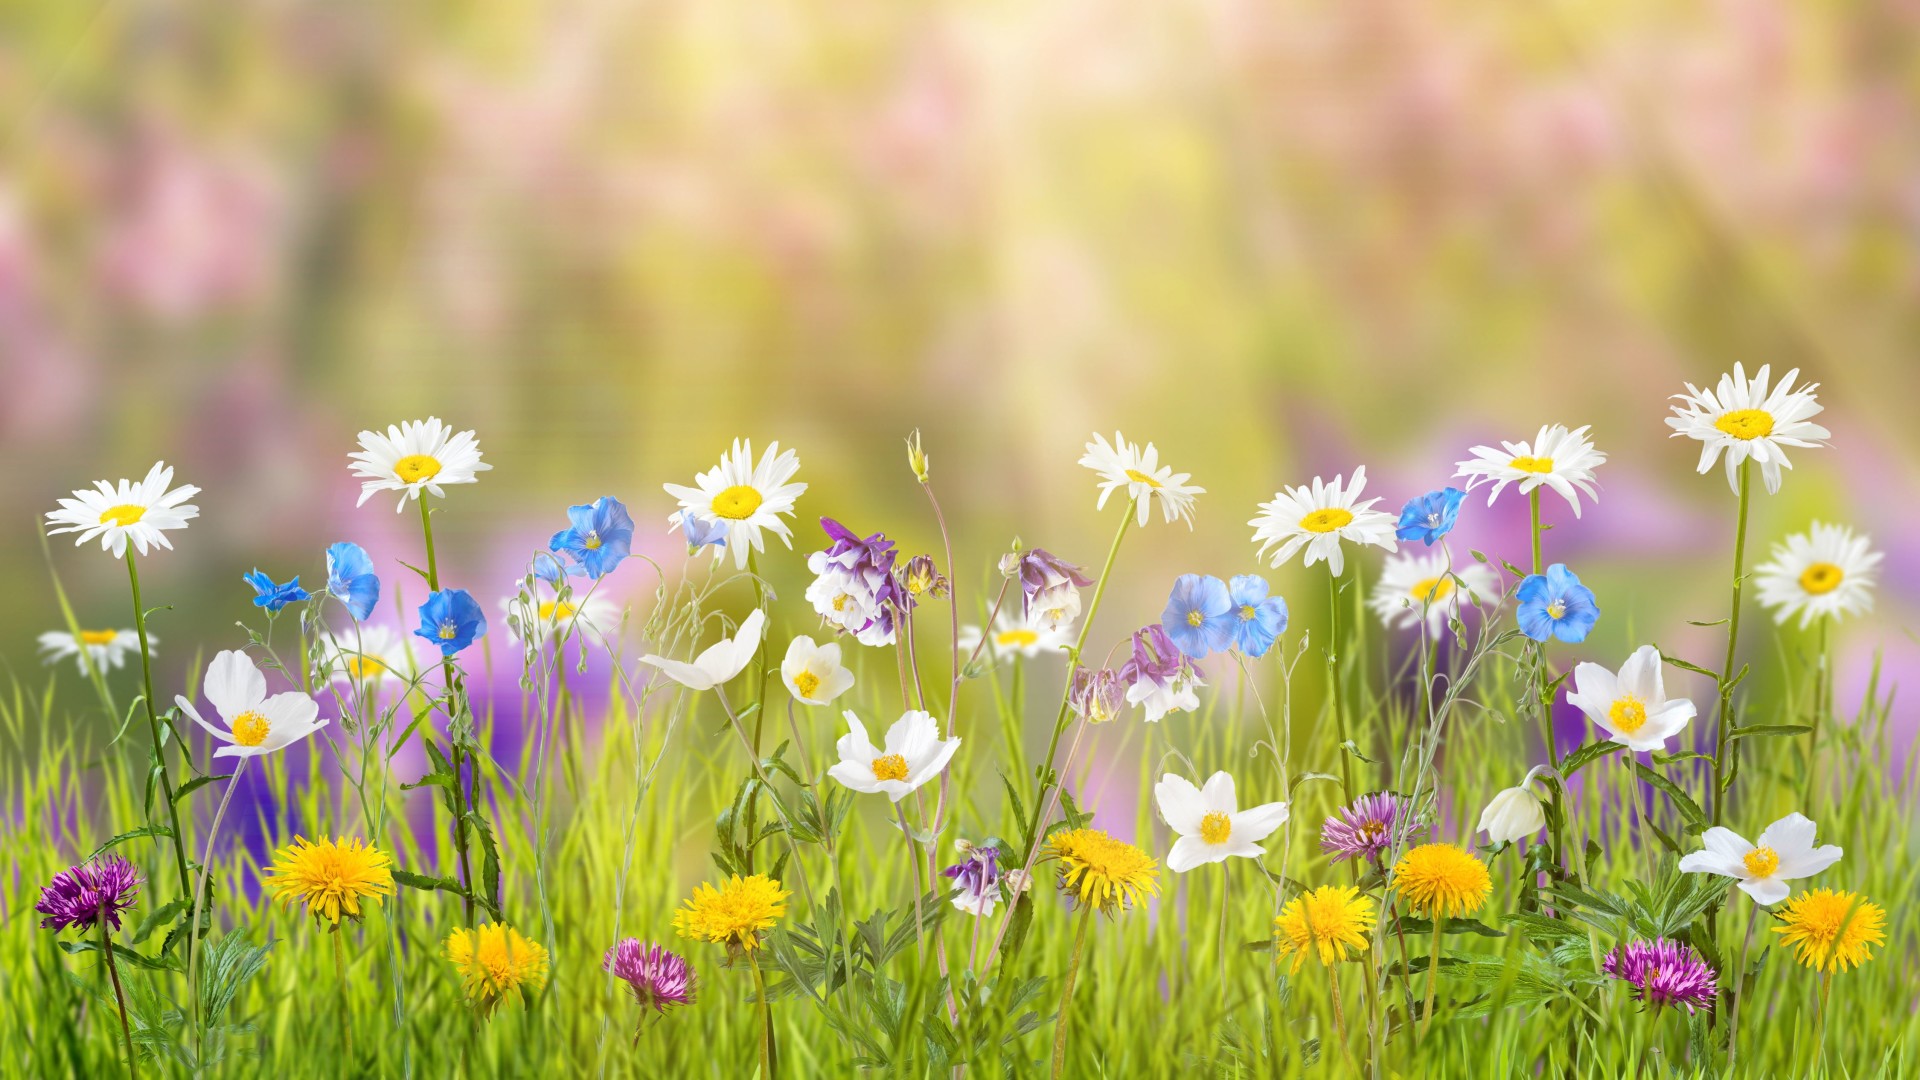 1920x1080 wallpaper,people in nature,meadow,natural landscape,nature,flower